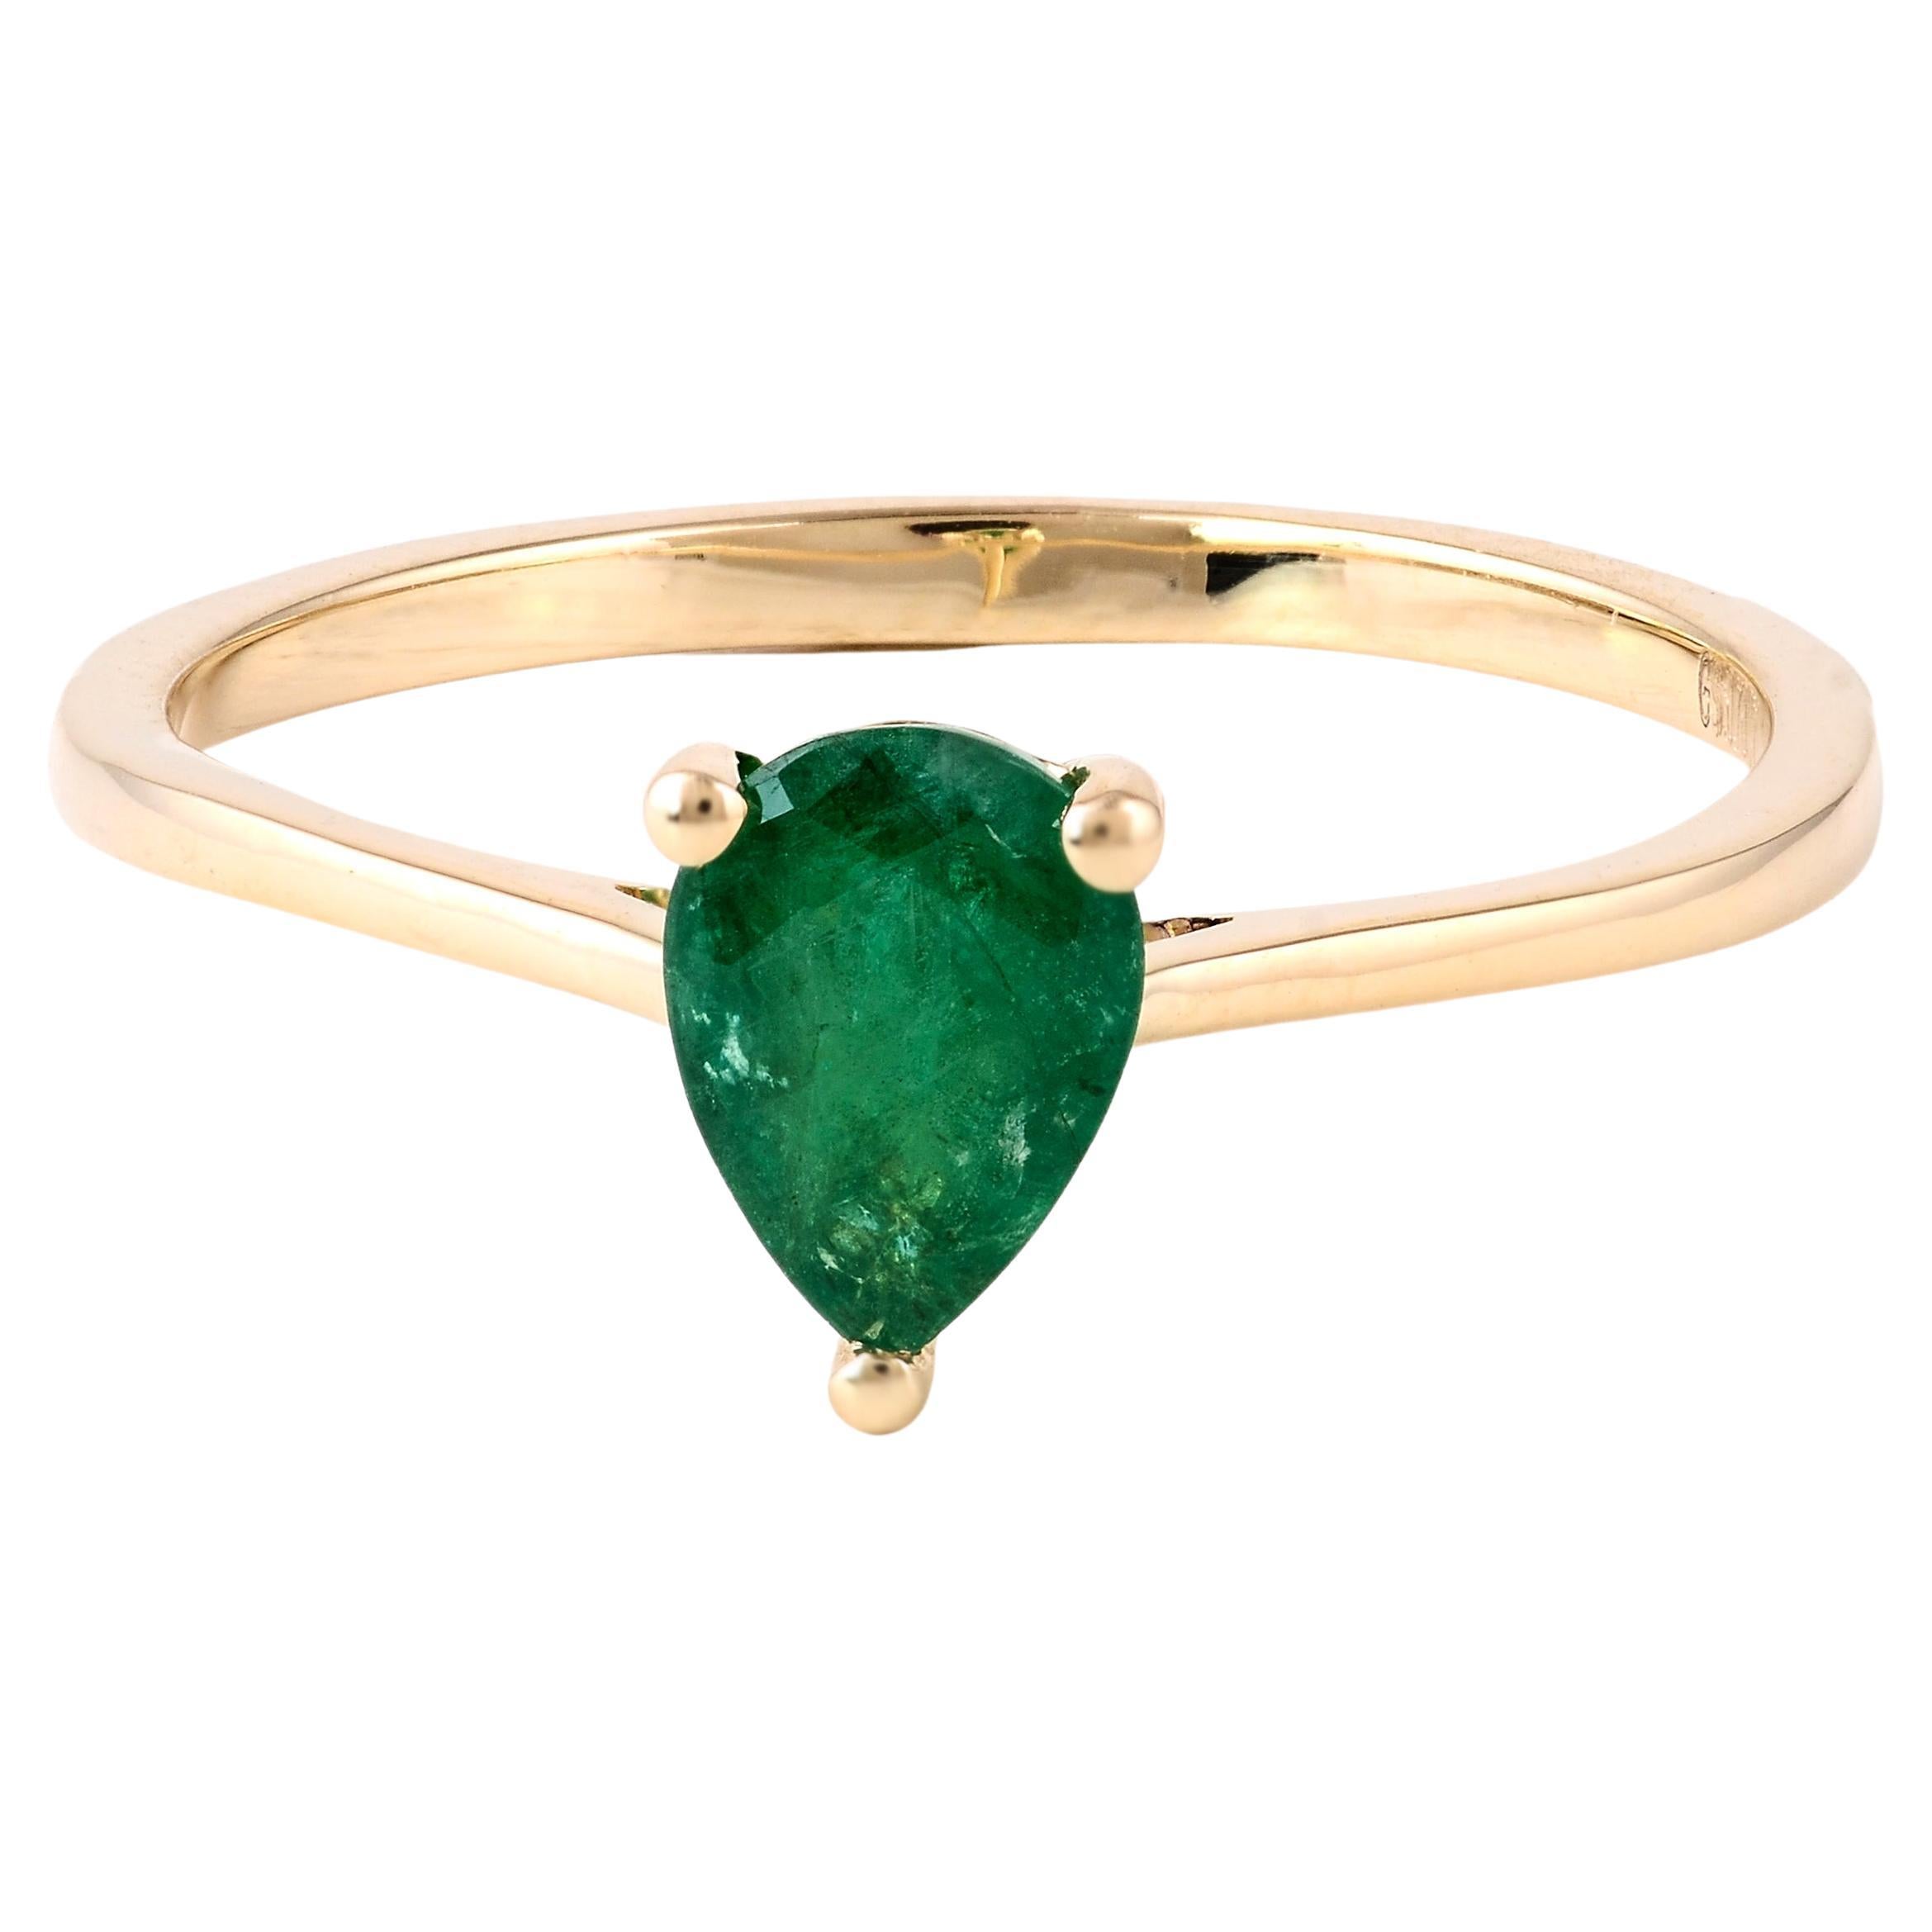 Luxurious 14K Emerald Cocktail Ring, Size 7 - Timeless & Elegant Statement Piece For Sale